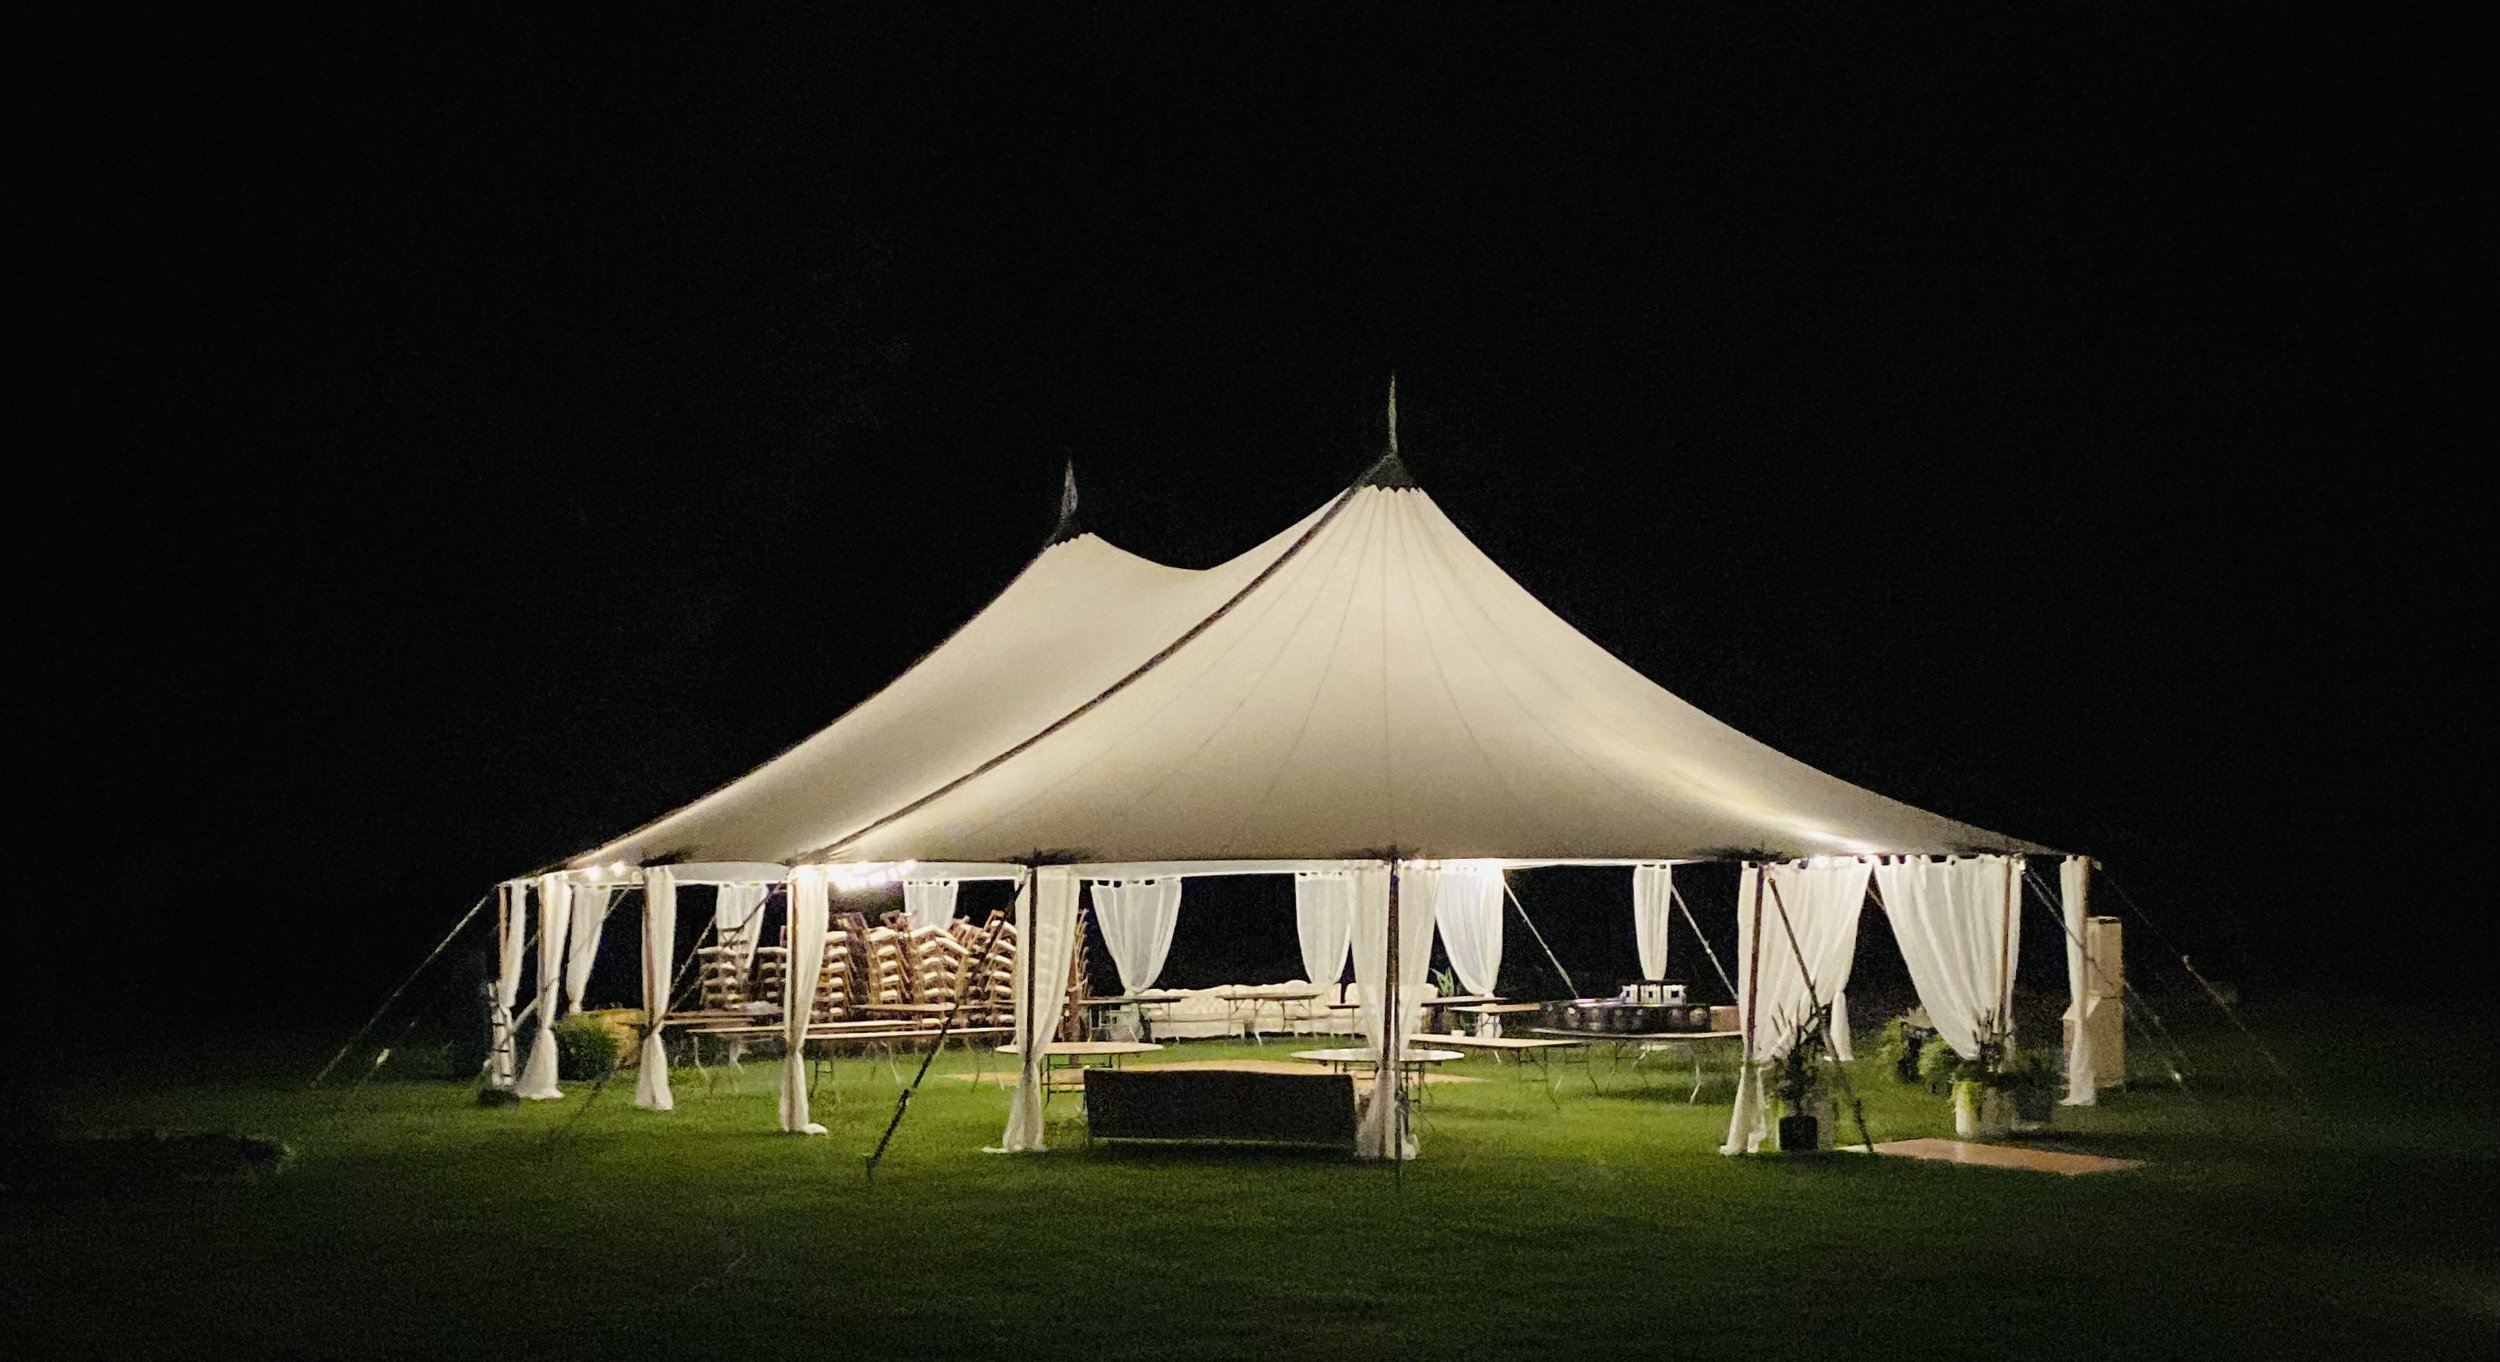 Verve Events and Tents